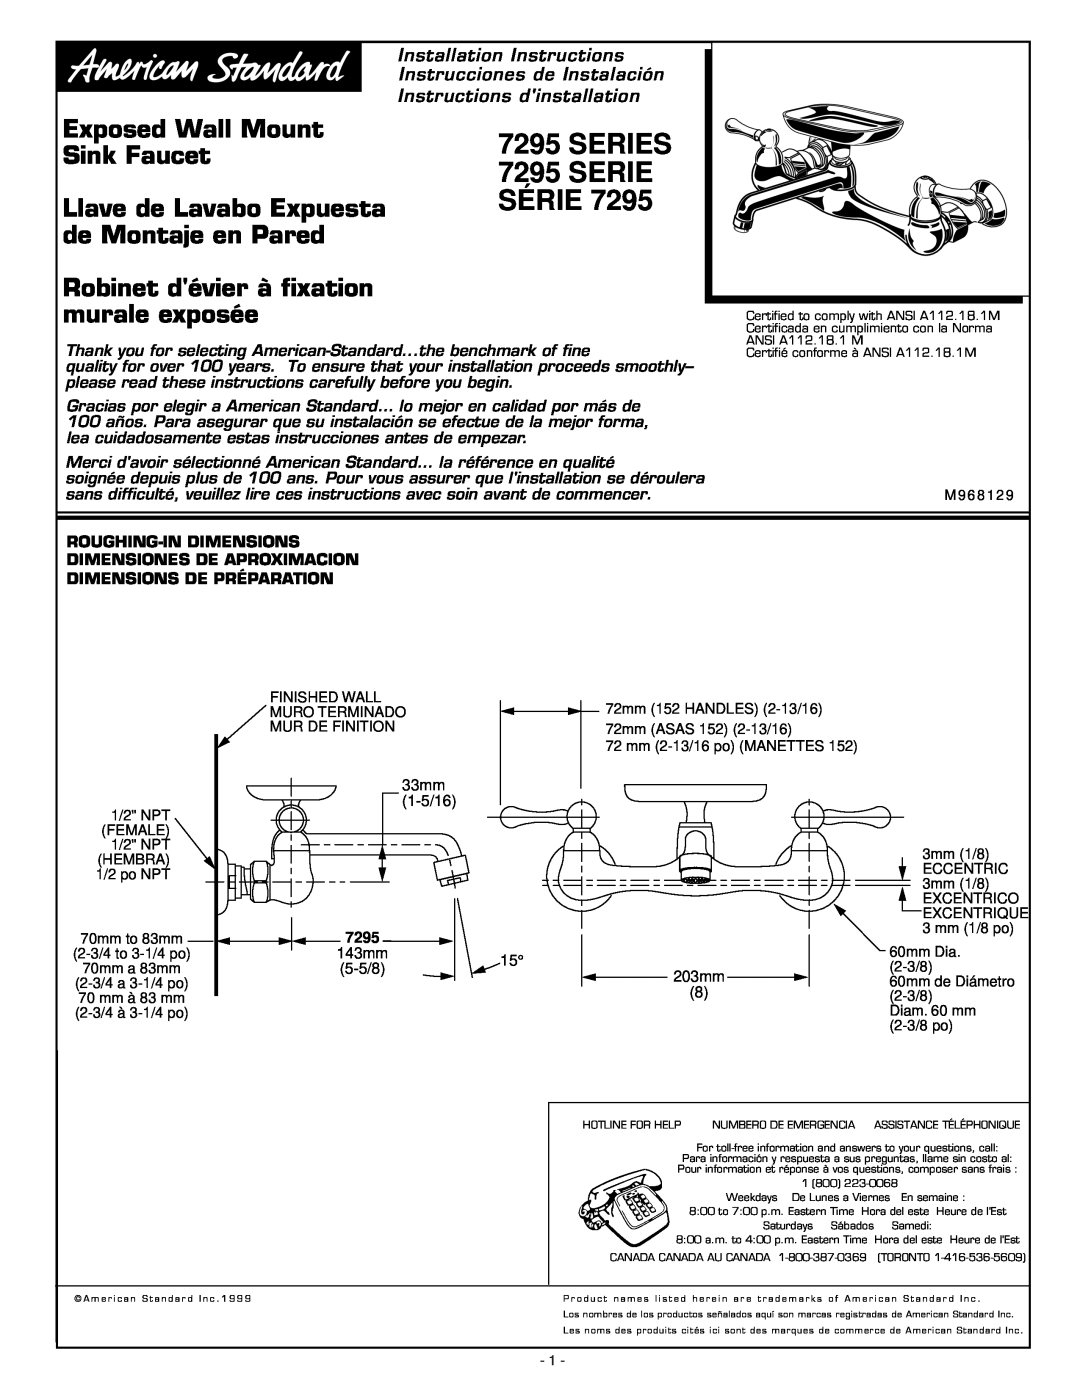 American Standard 7295 Series installation instructions Roughing-Indimensions Dimensiones De Aproximacion, Série 